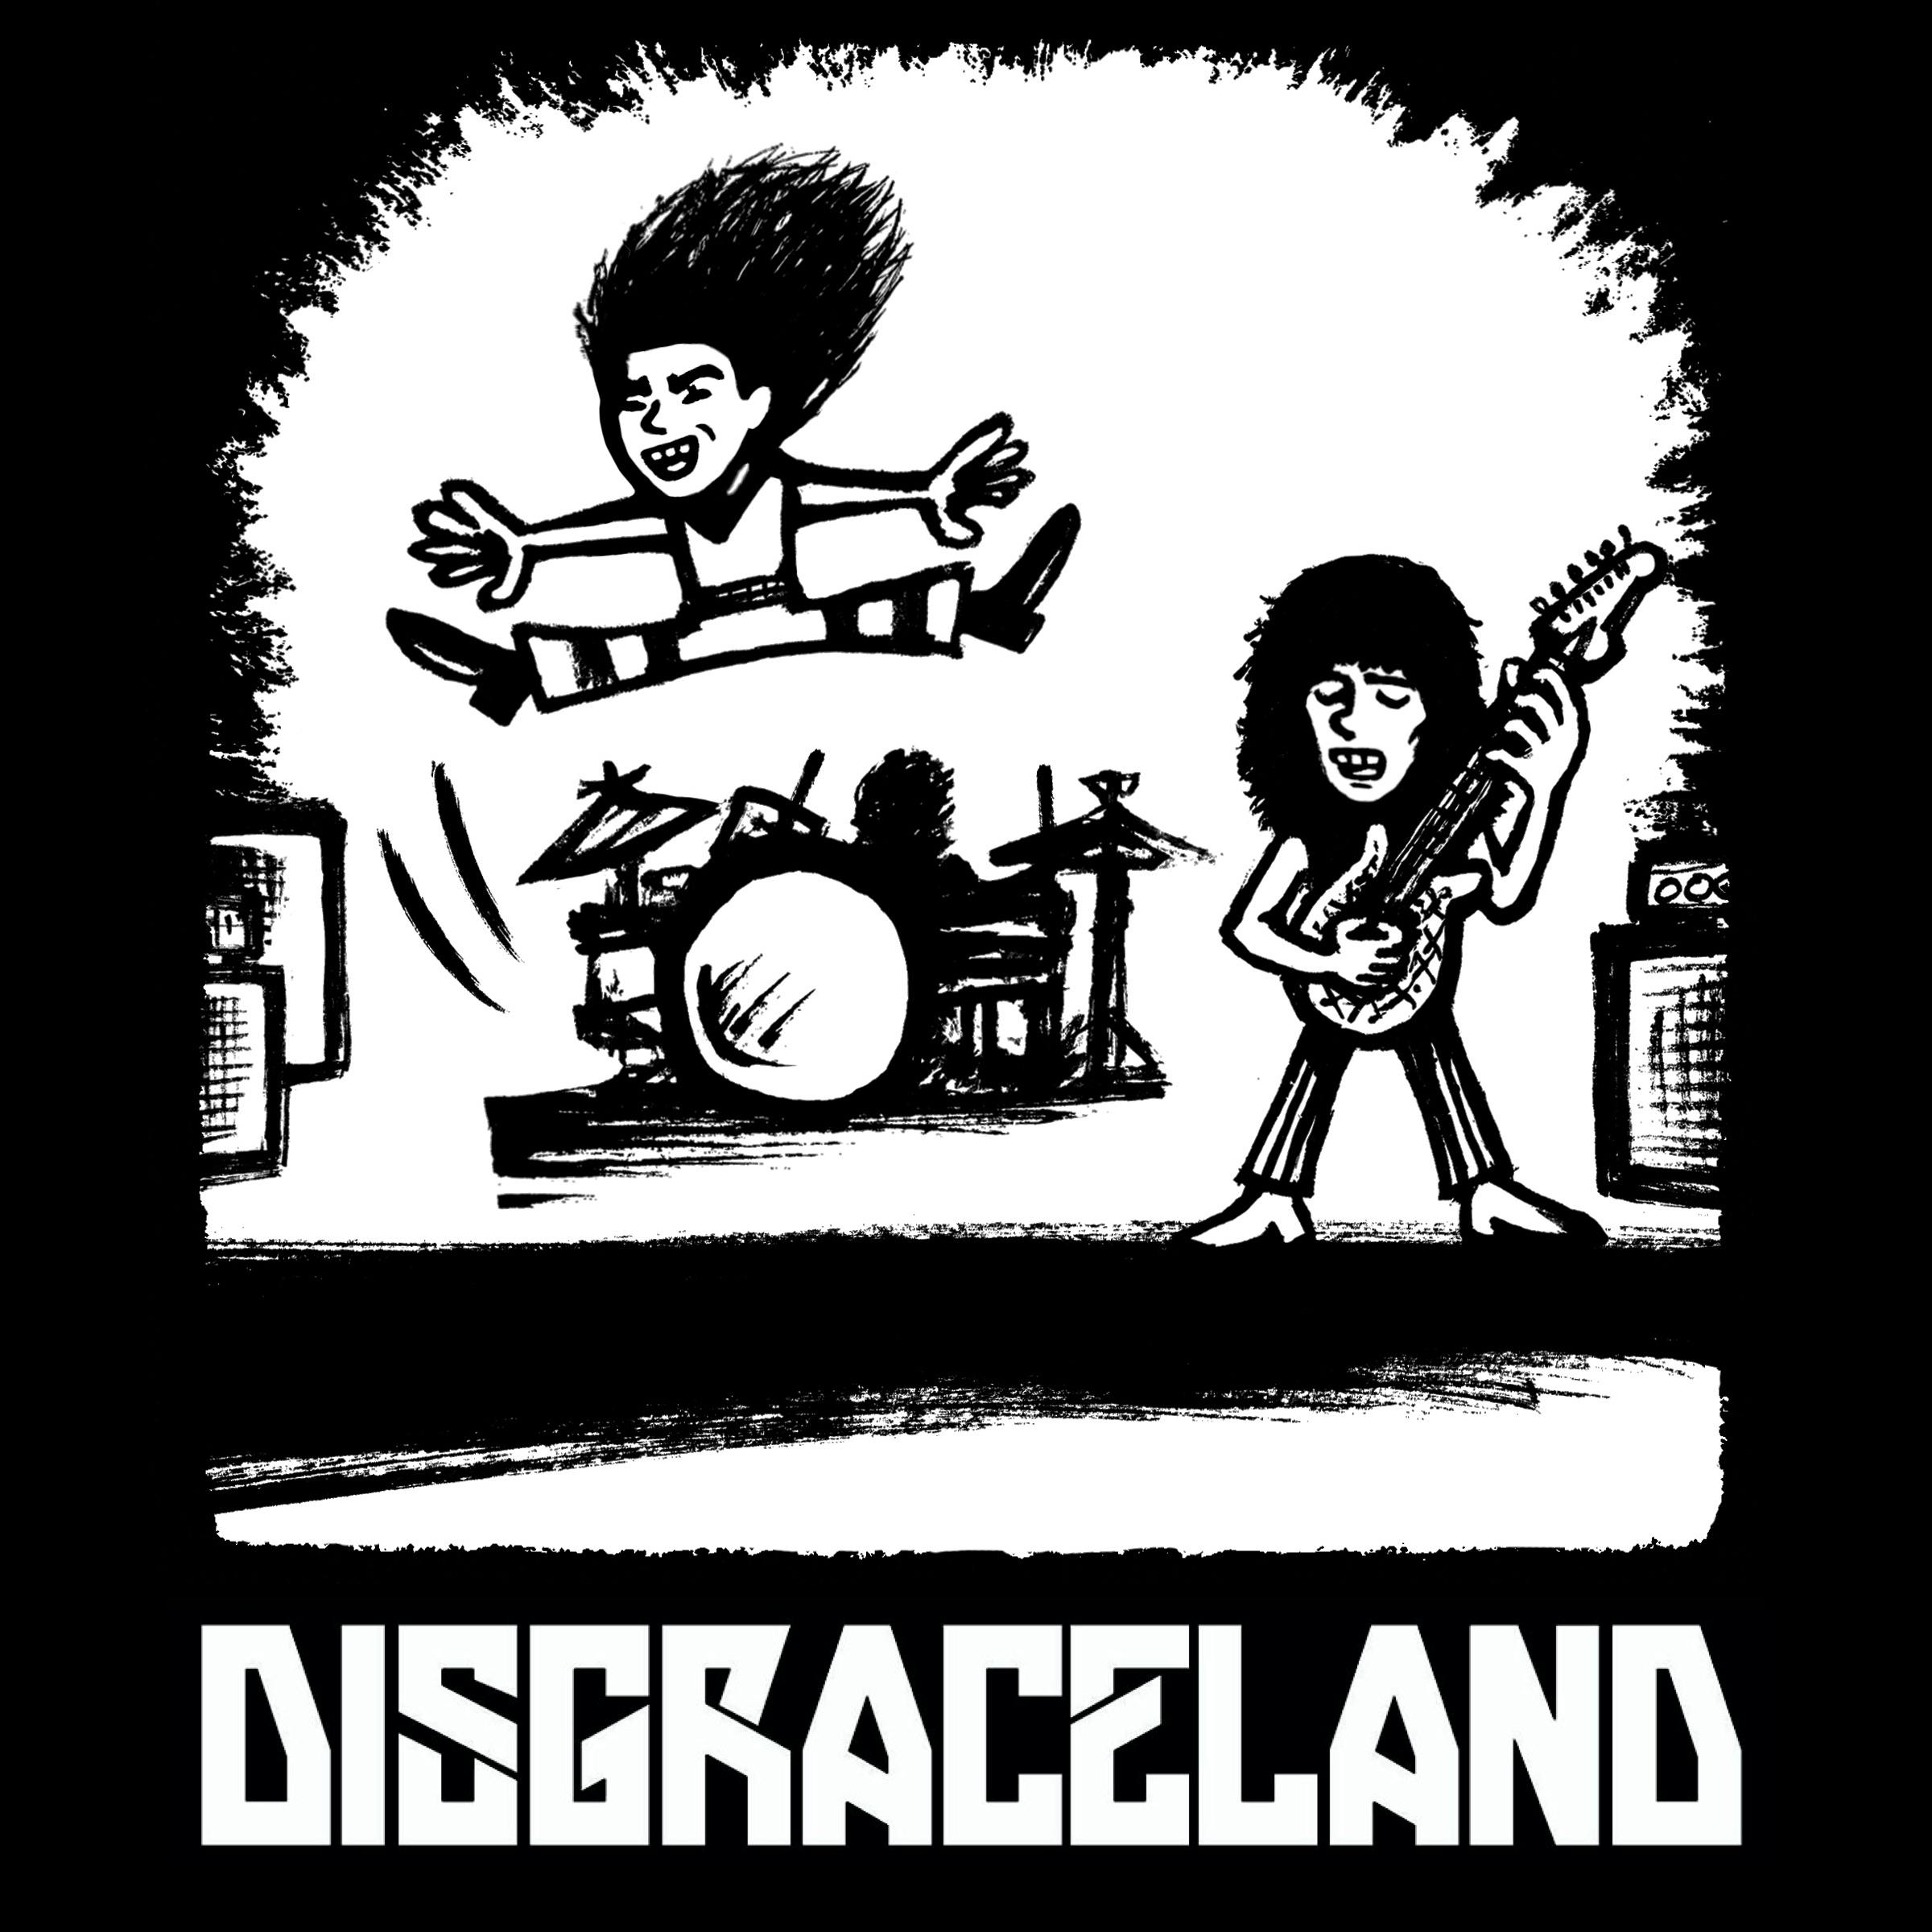 Presenting Disgraceland - Van Halen: Bootleggers, U.S. Marshals, and Protecting Innovation at Any Cost